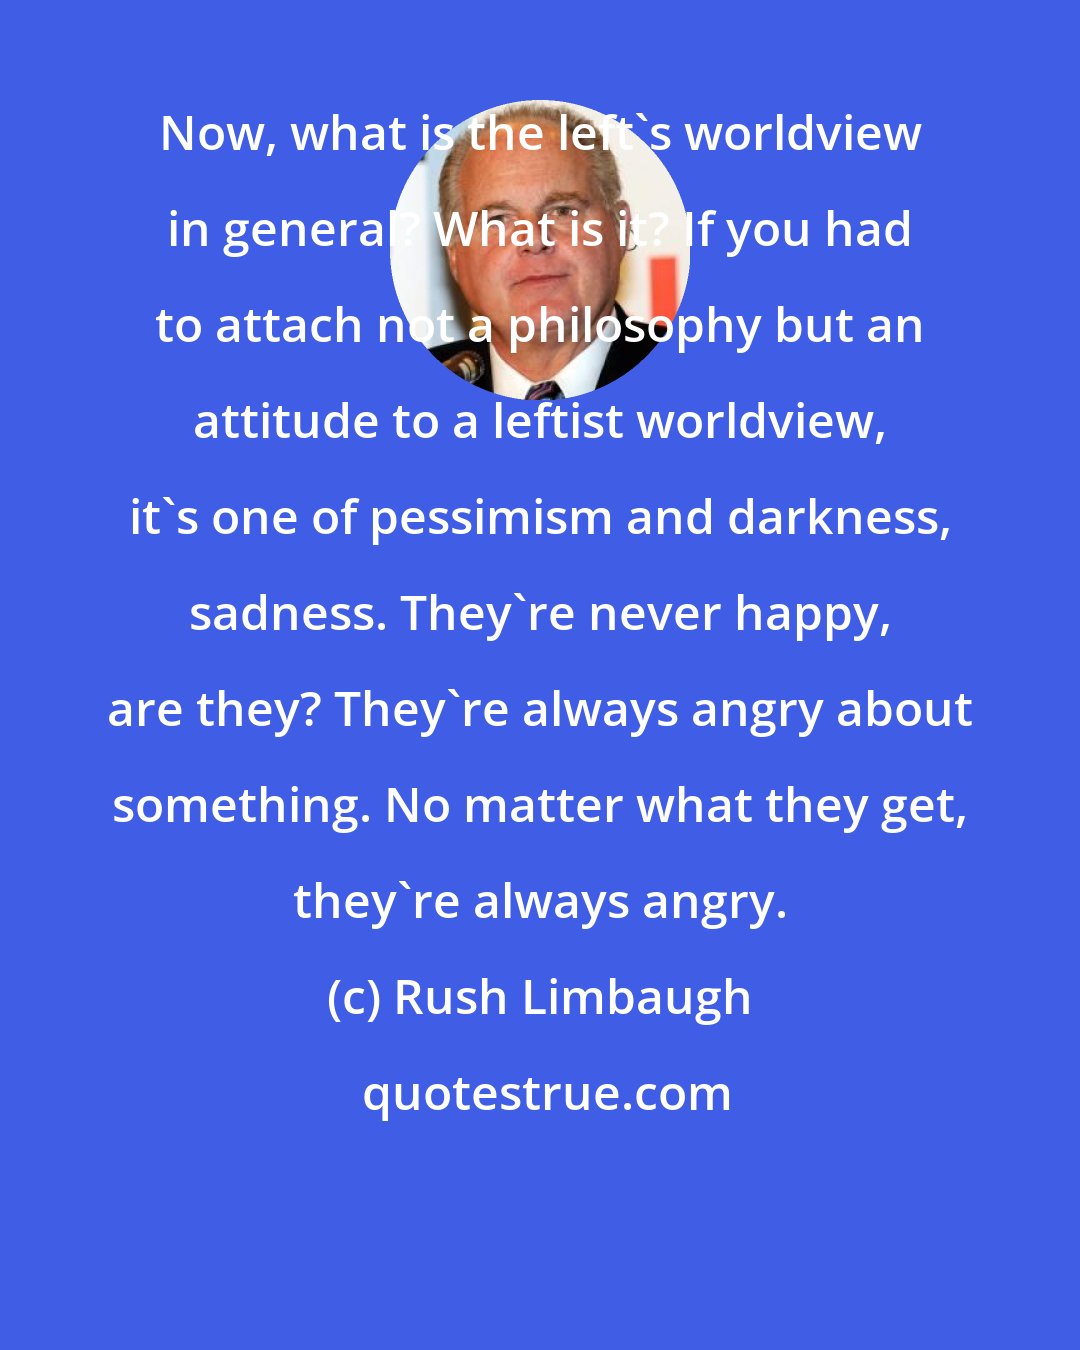 Rush Limbaugh: Now, what is the left's worldview in general? What is it? If you had to attach not a philosophy but an attitude to a leftist worldview, it's one of pessimism and darkness, sadness. They're never happy, are they? They're always angry about something. No matter what they get, they're always angry.